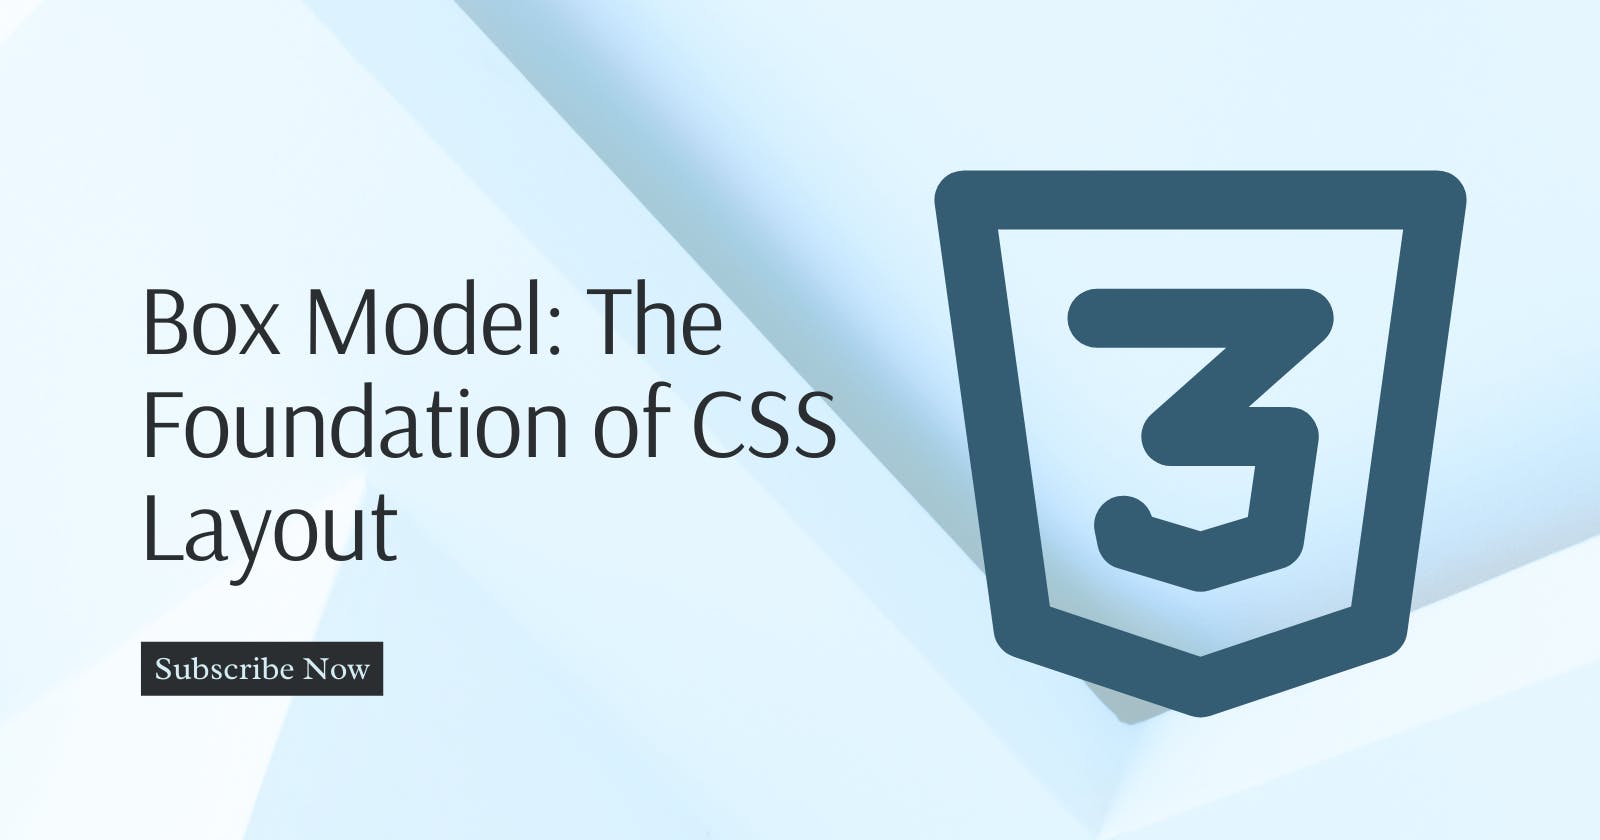 Box Model: Understanding the Foundation of CSS Layout